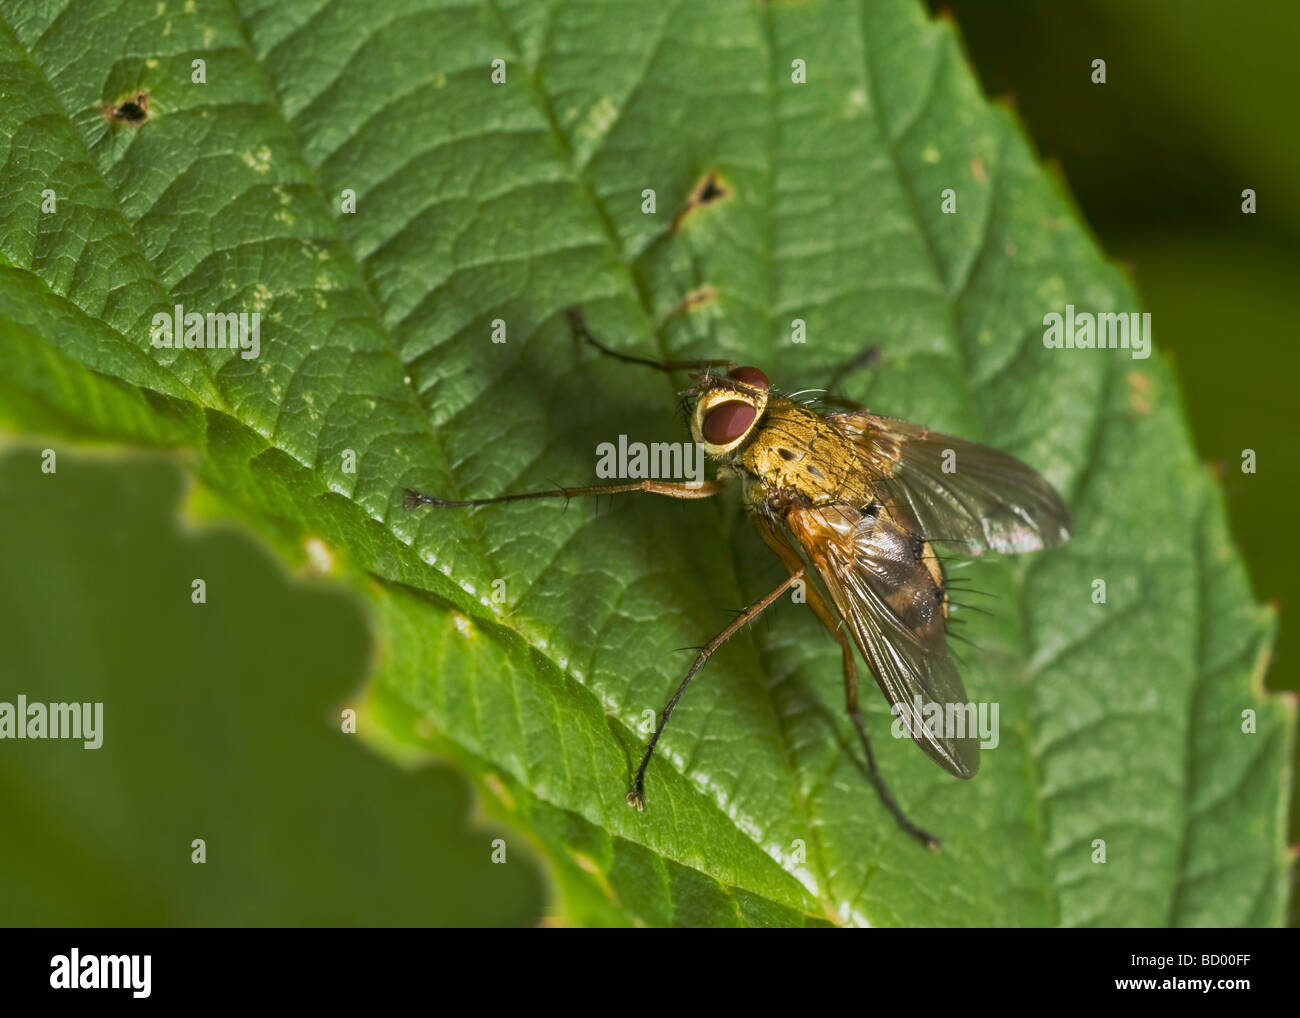 Dexia rustica fly sitting on a leaf. Stock Photo